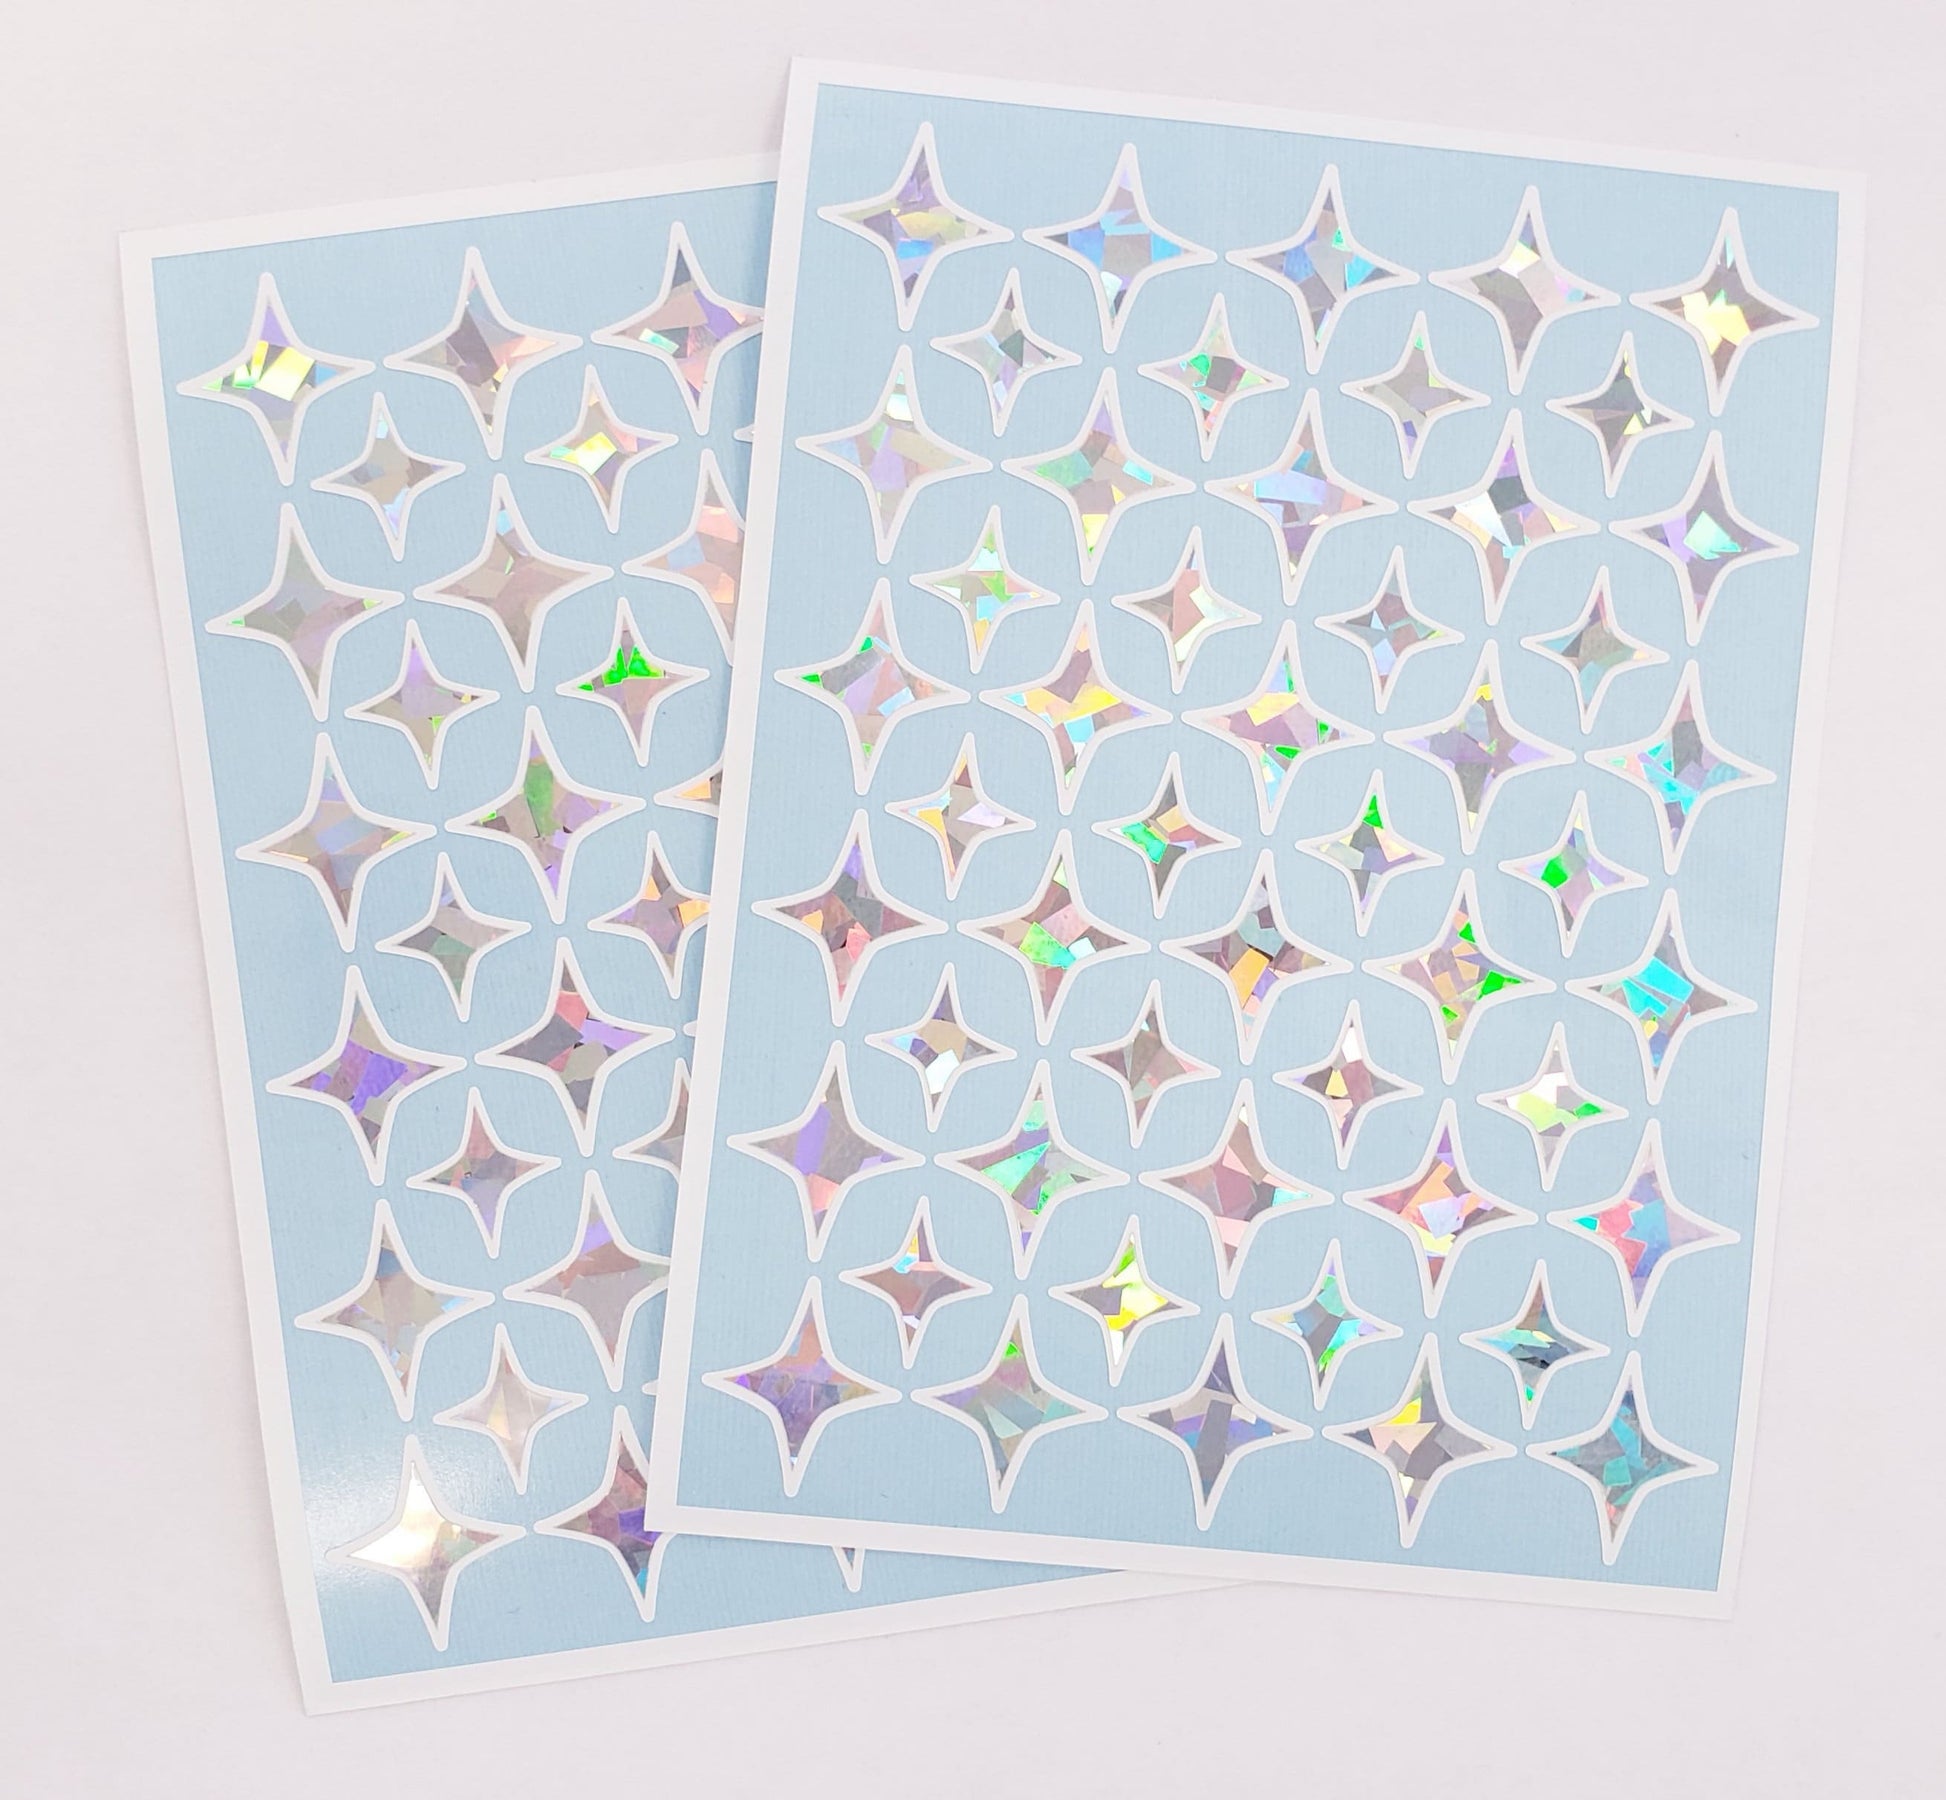 Sparkle Star Sticker Sheet, set of 50 small holographic vinyl stars for tumblers, journals, scrapbook pages and craft projects